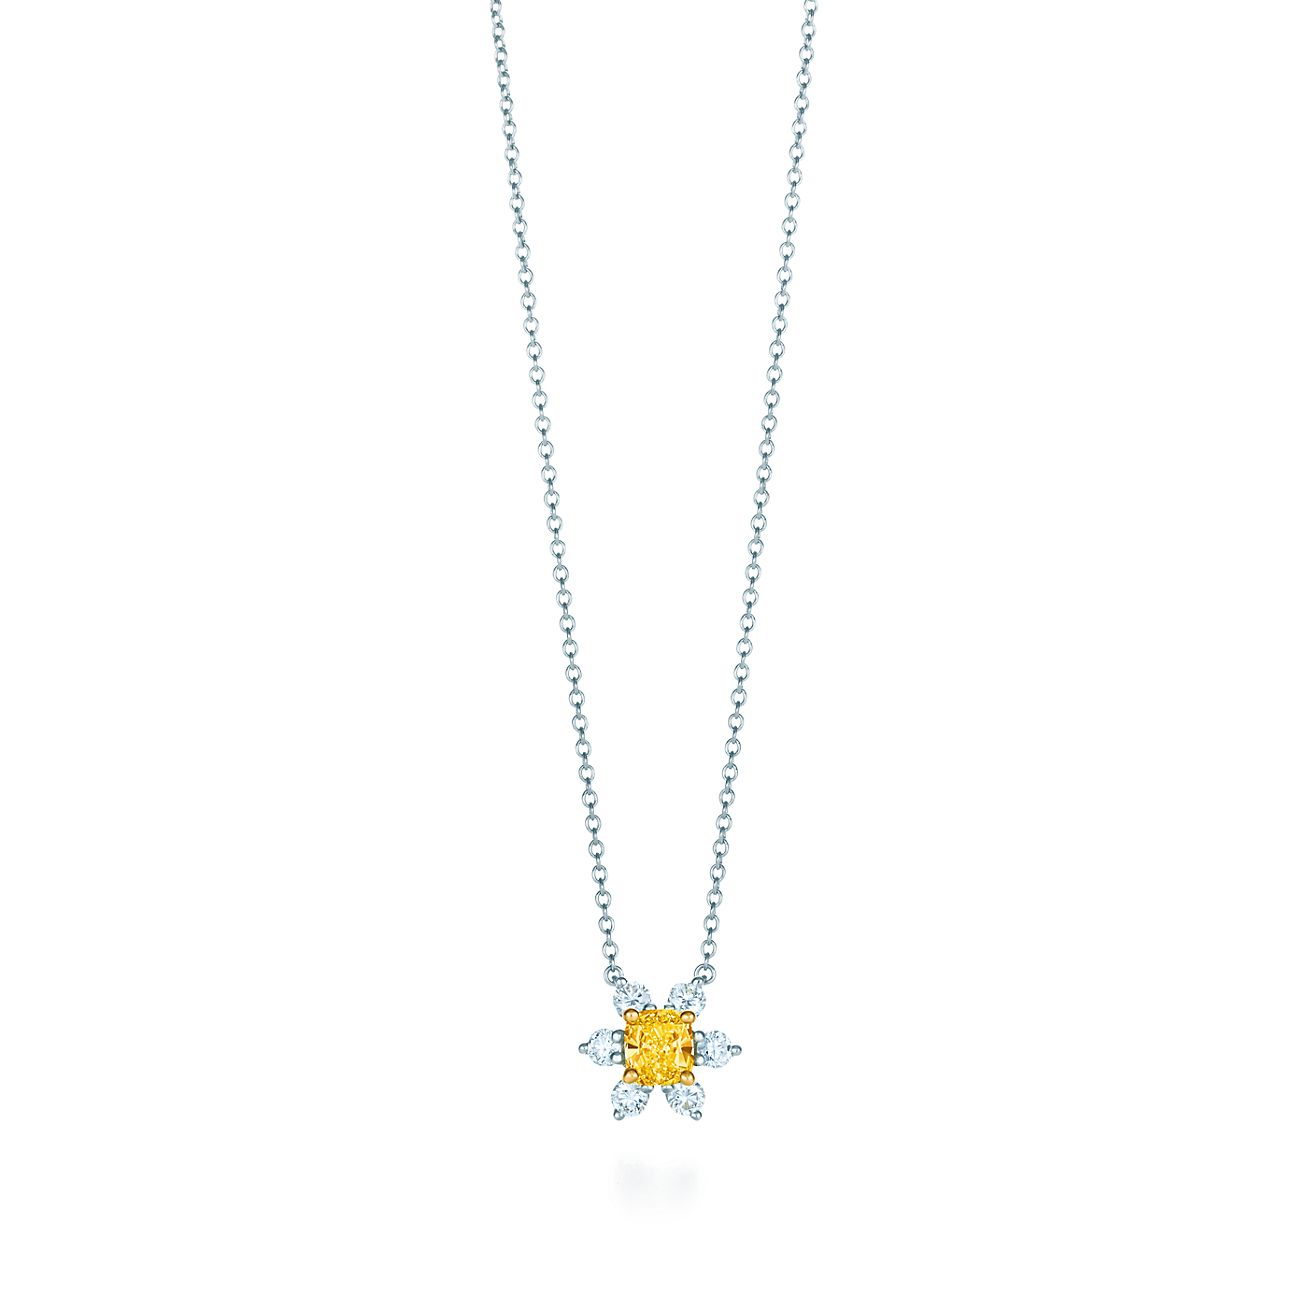 Buttercup pendant in 18k gold and 